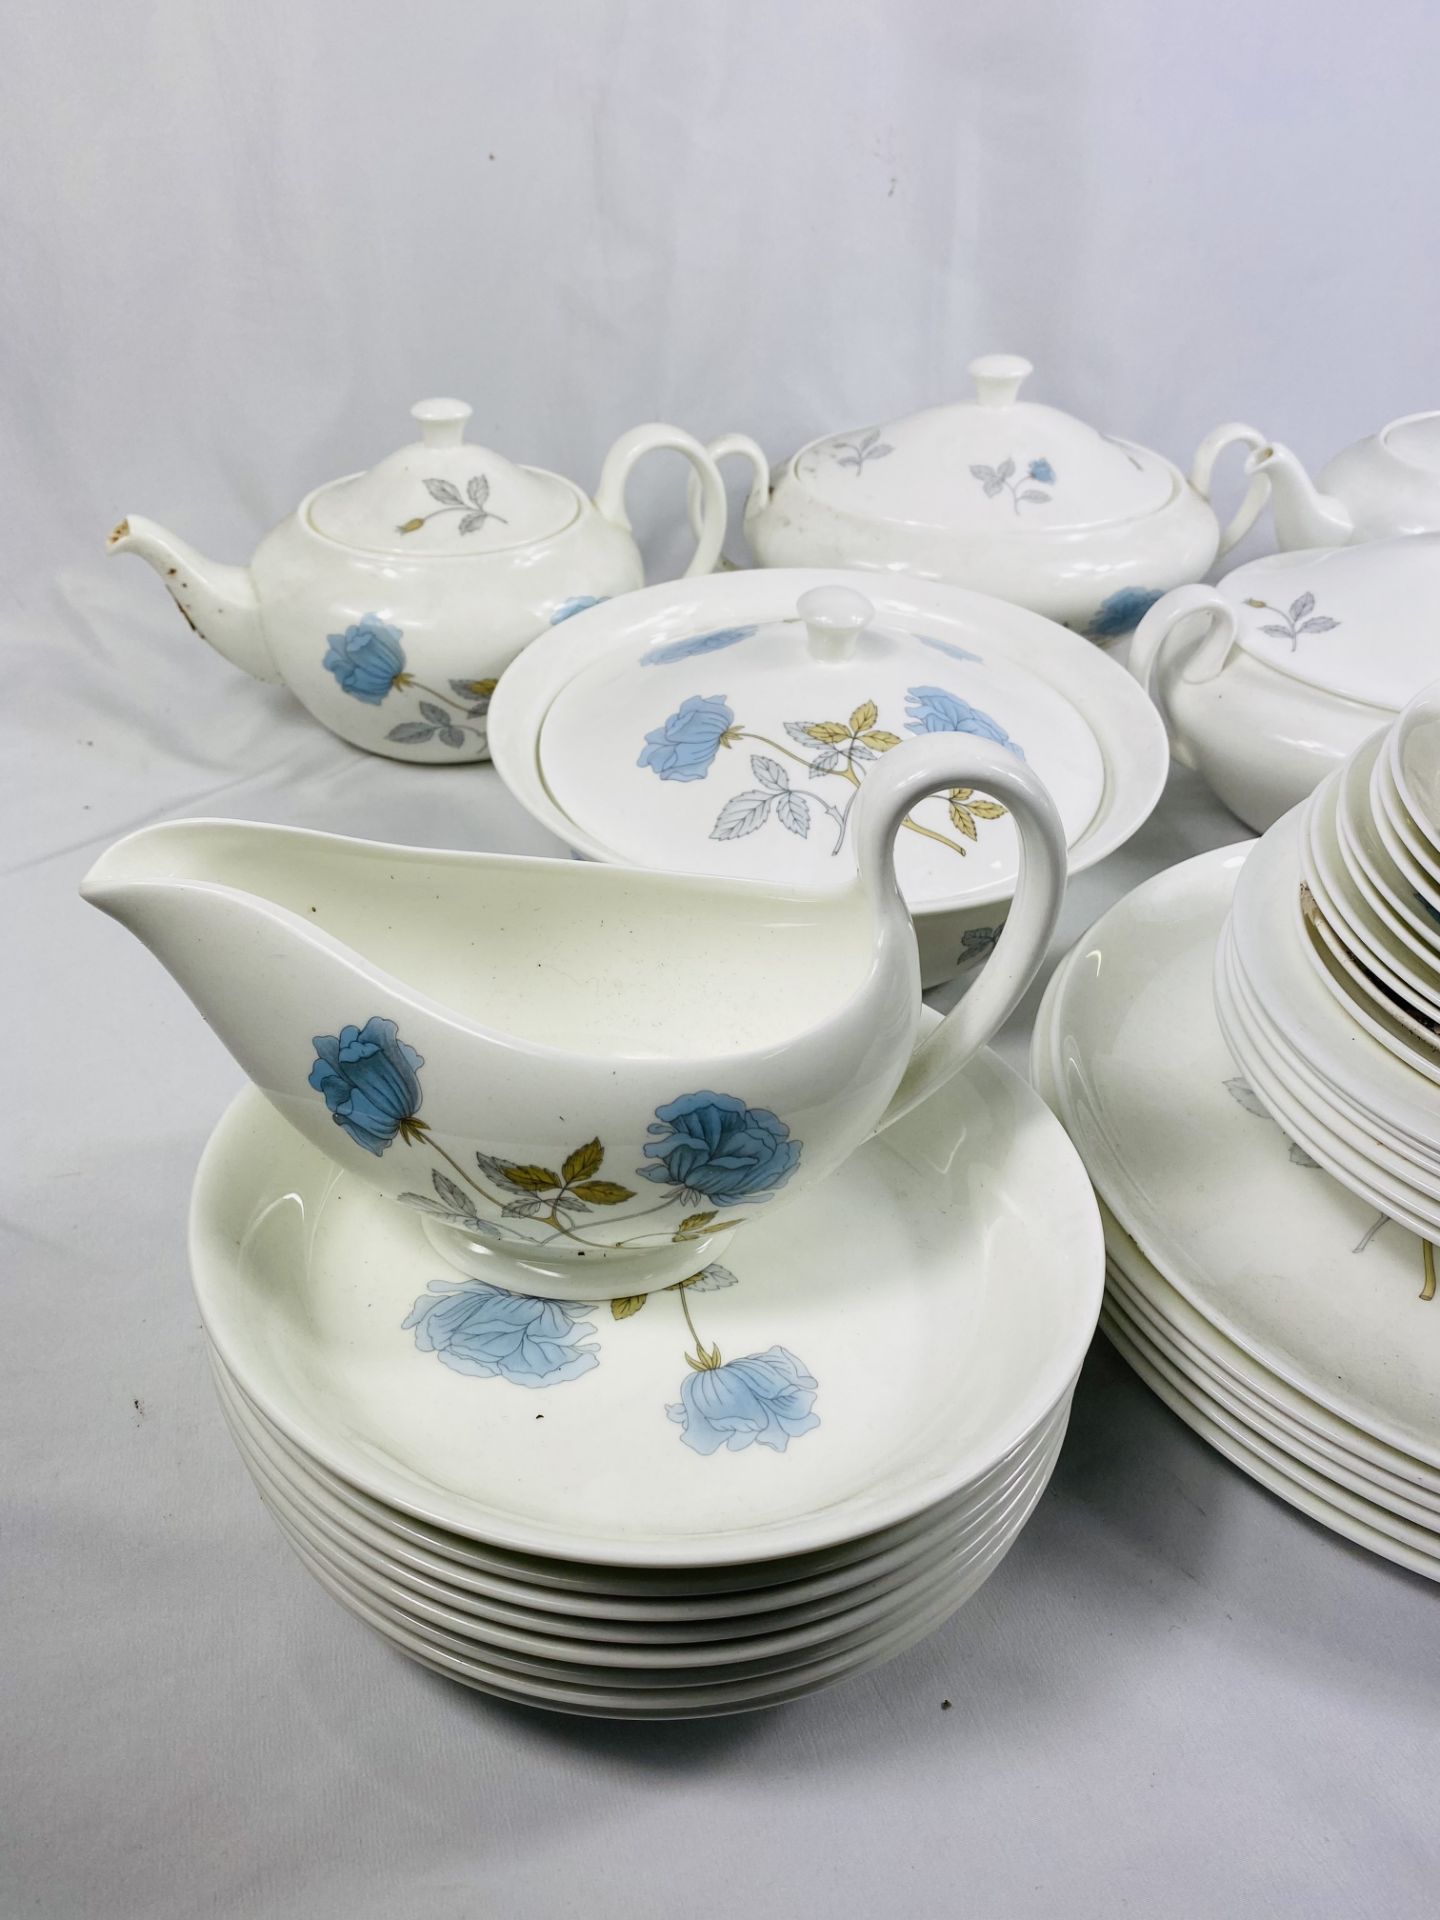 Wedgwood Ice Rose part dinner service - Image 4 of 6